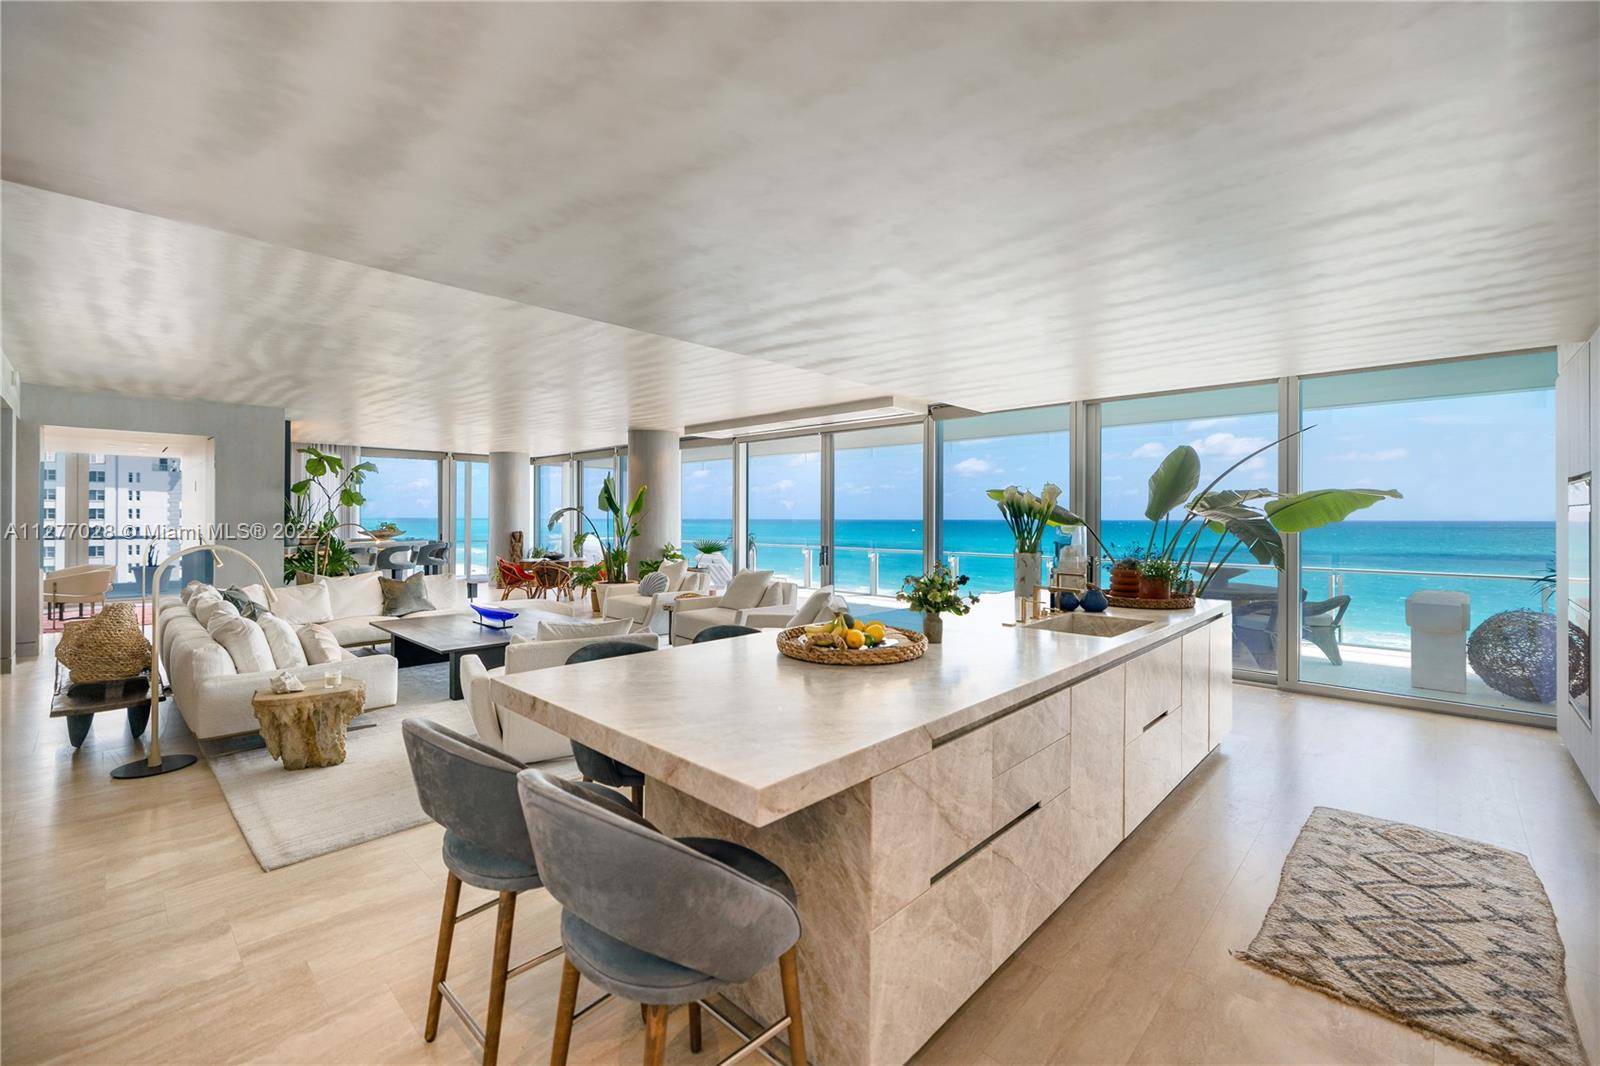 Relish in old world charm of The Surf Club and enjoy state of the art Four Seasons hospitality in this exclusive, rare corner residence with architectural design by Richard Meier ...